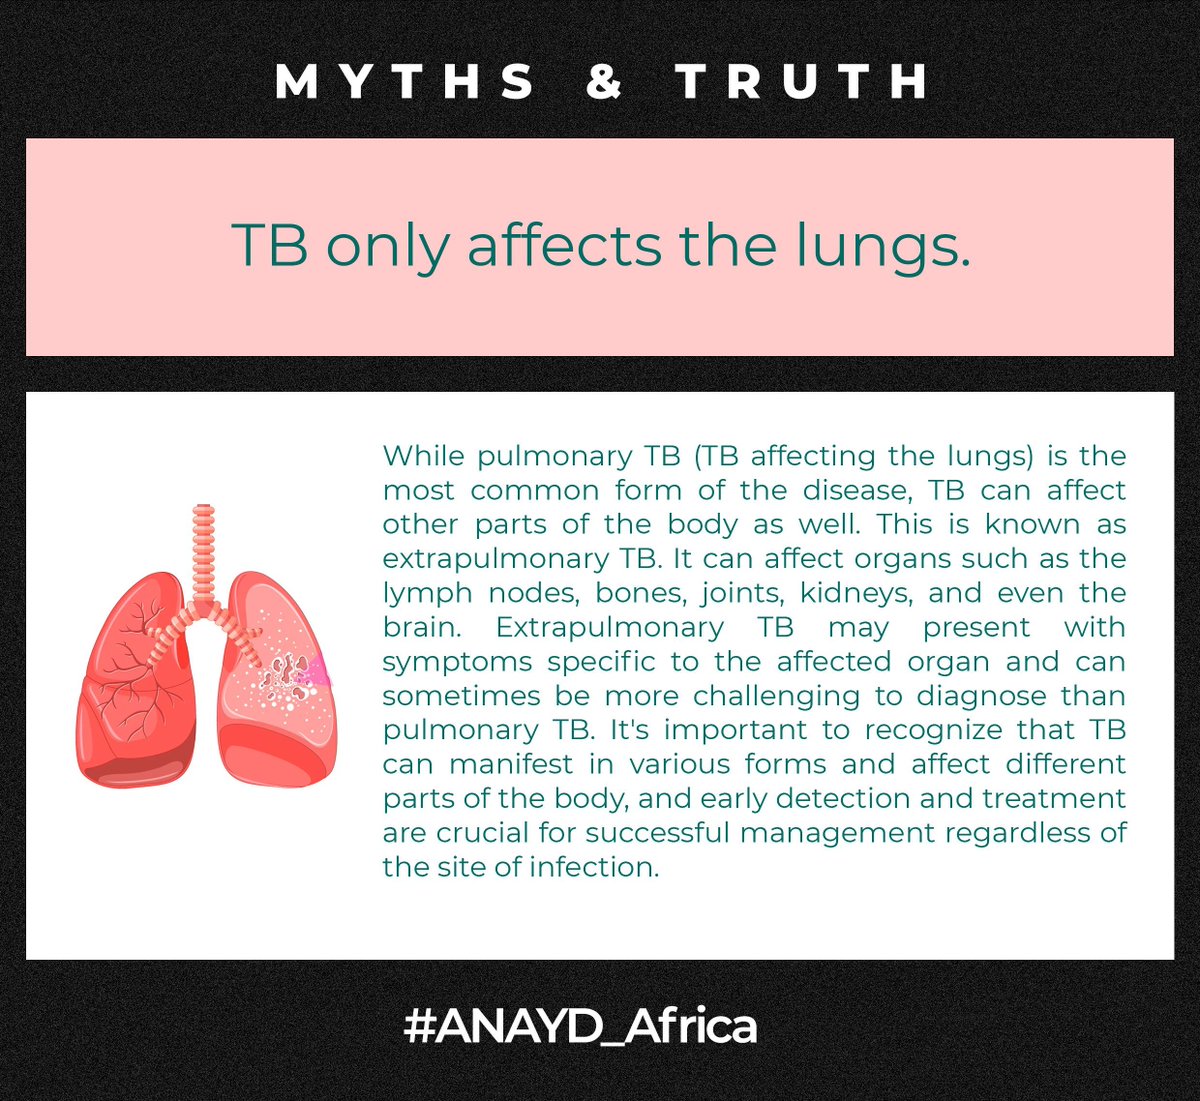 Separating myths from truths about TB today! 
Education is key in the fight against tuberculosis. 
Let's debunk misconceptions, promote early detection, and support those affected. 
Together, we can #EndTB. 

#TBFreeWorld 🌐💙
#ANAYD_Africa